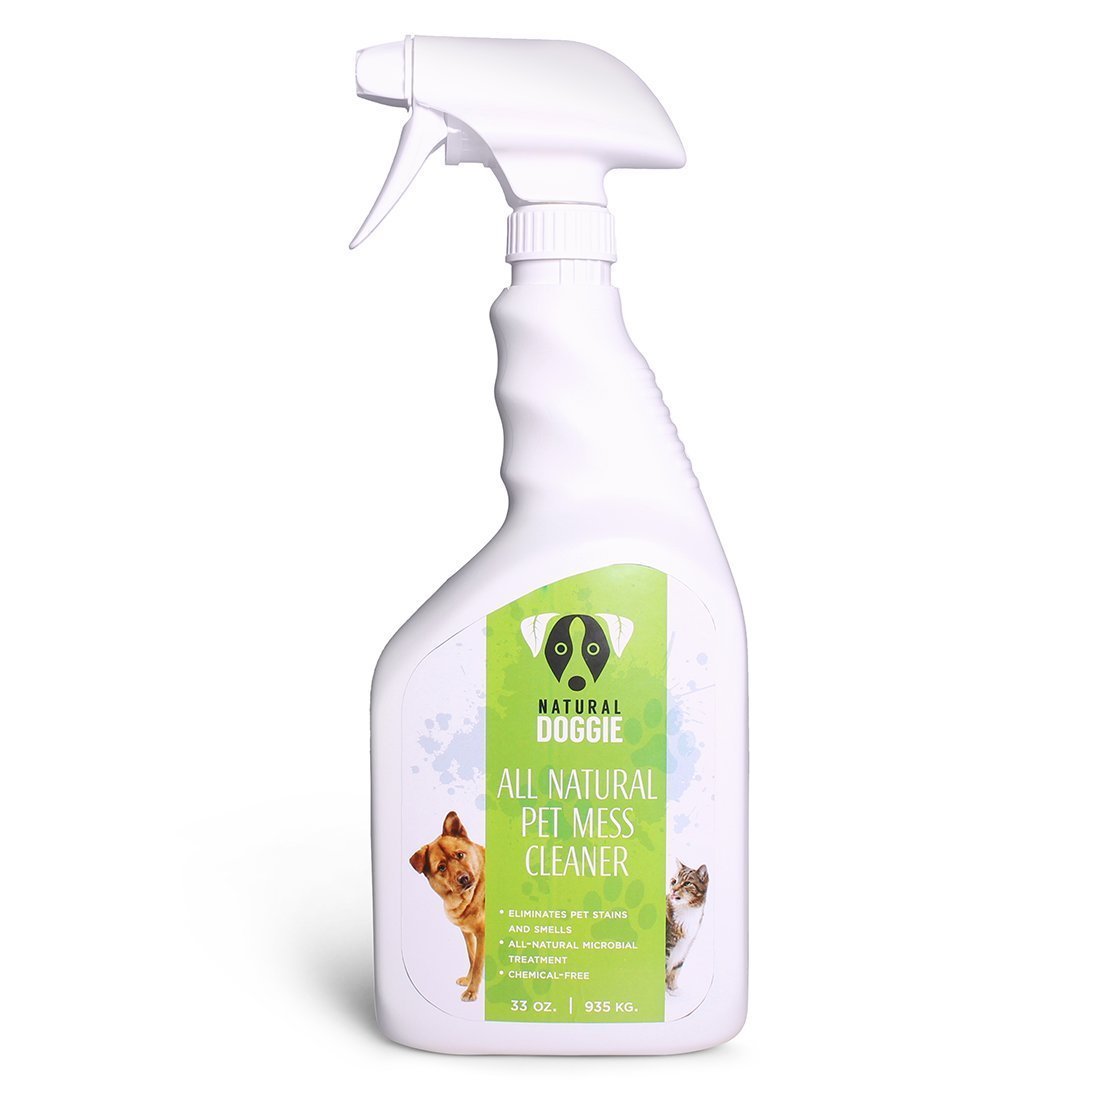 All Natural Pet Mess Cleaner-Pet cleaners-Pet's Choice Supply